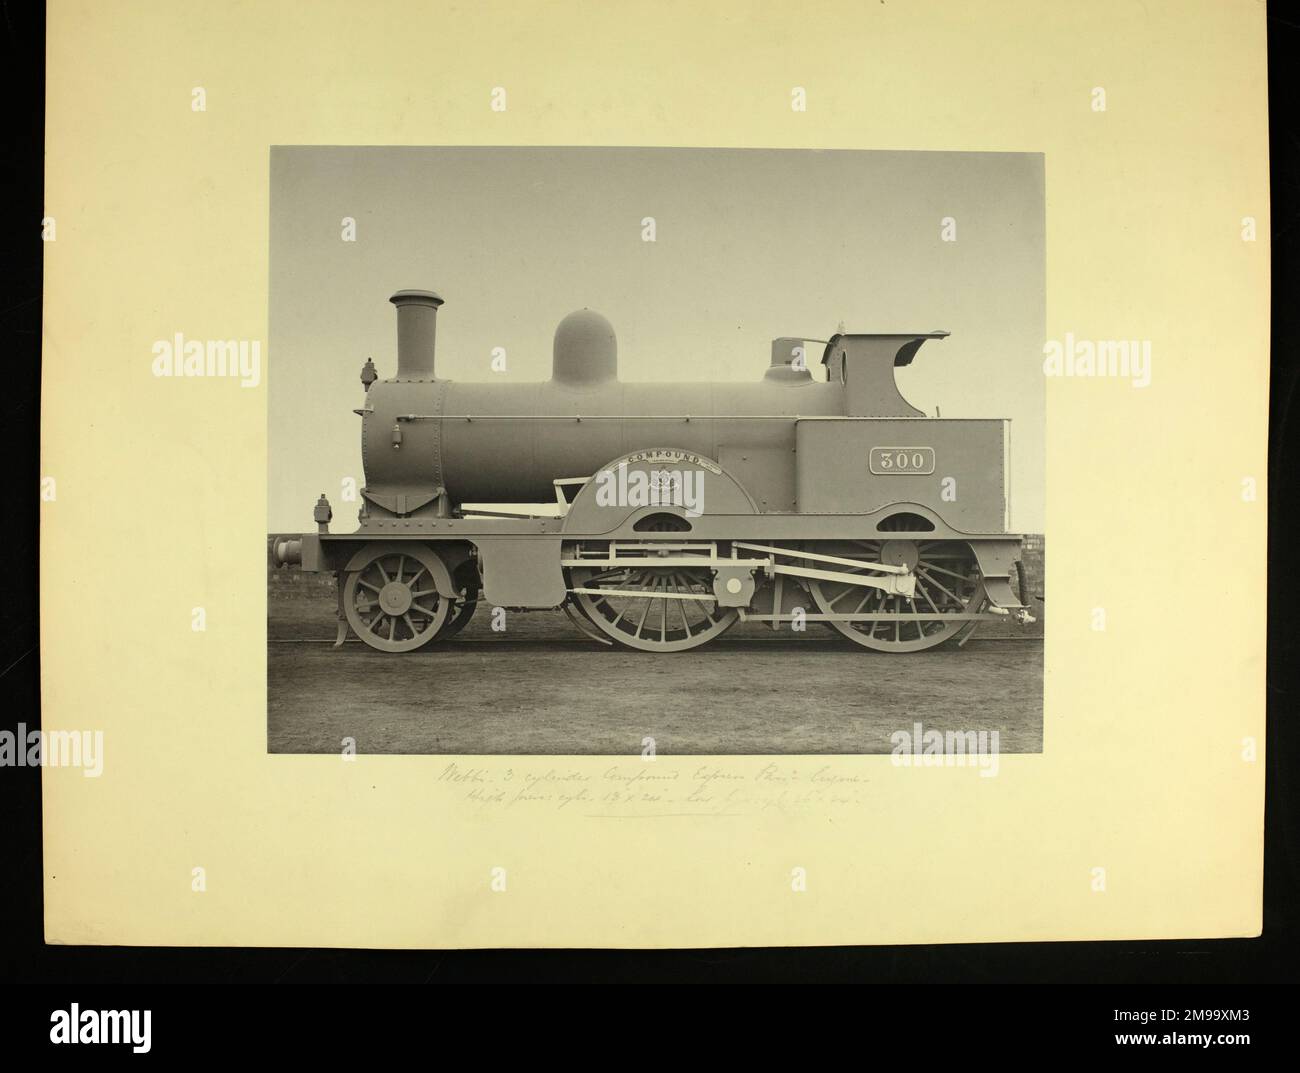 Photograph of Locomotive no 300 Webb's patent compound engine, side view. Stock Photo